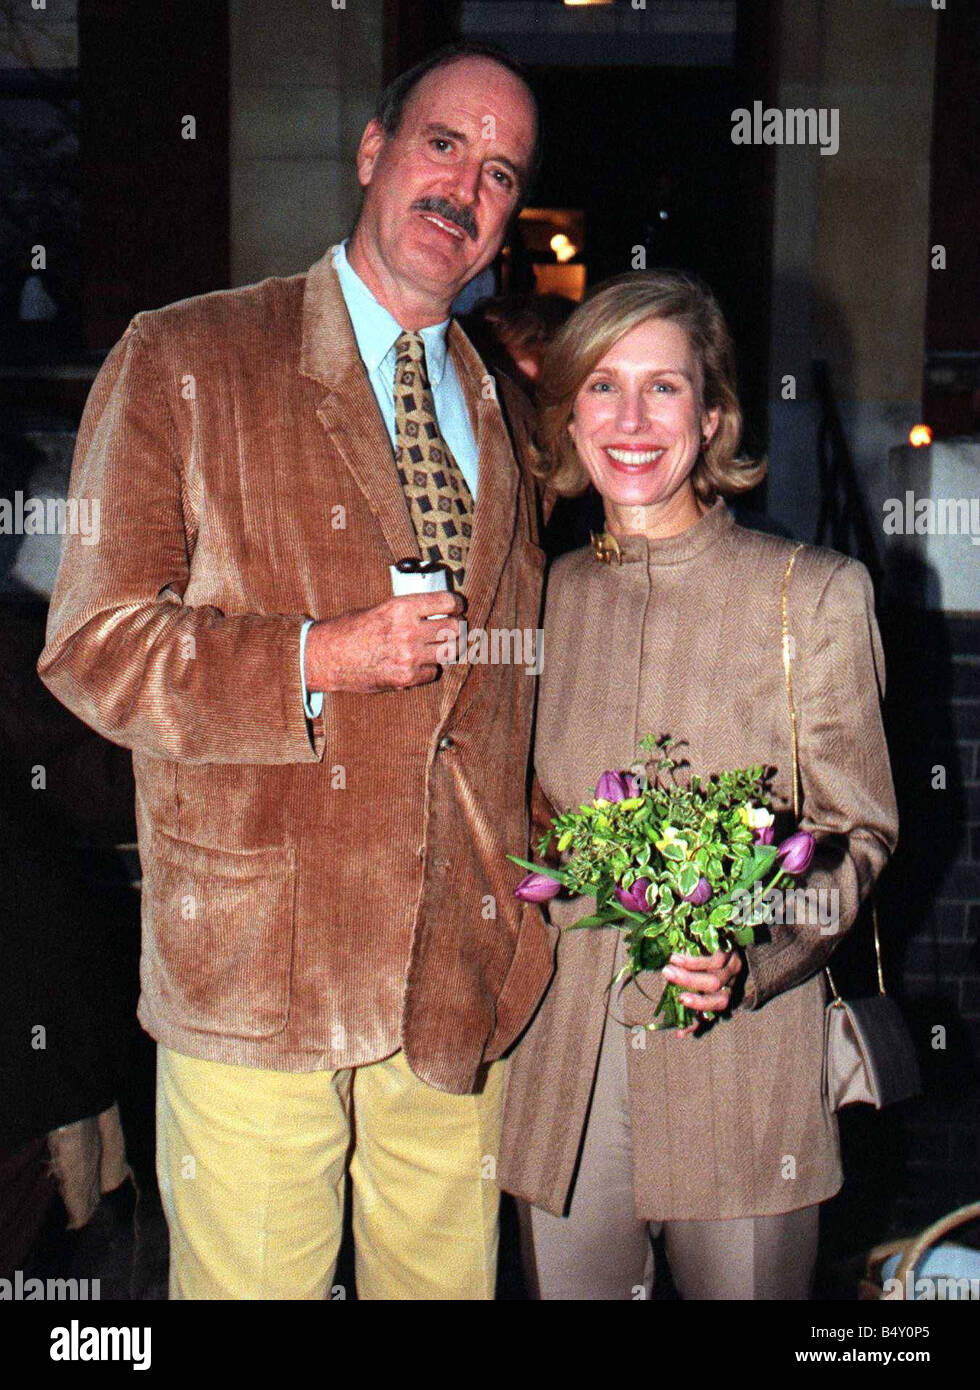 John Cleese and wife arrive for Michael Winners birthday party Stock Photo